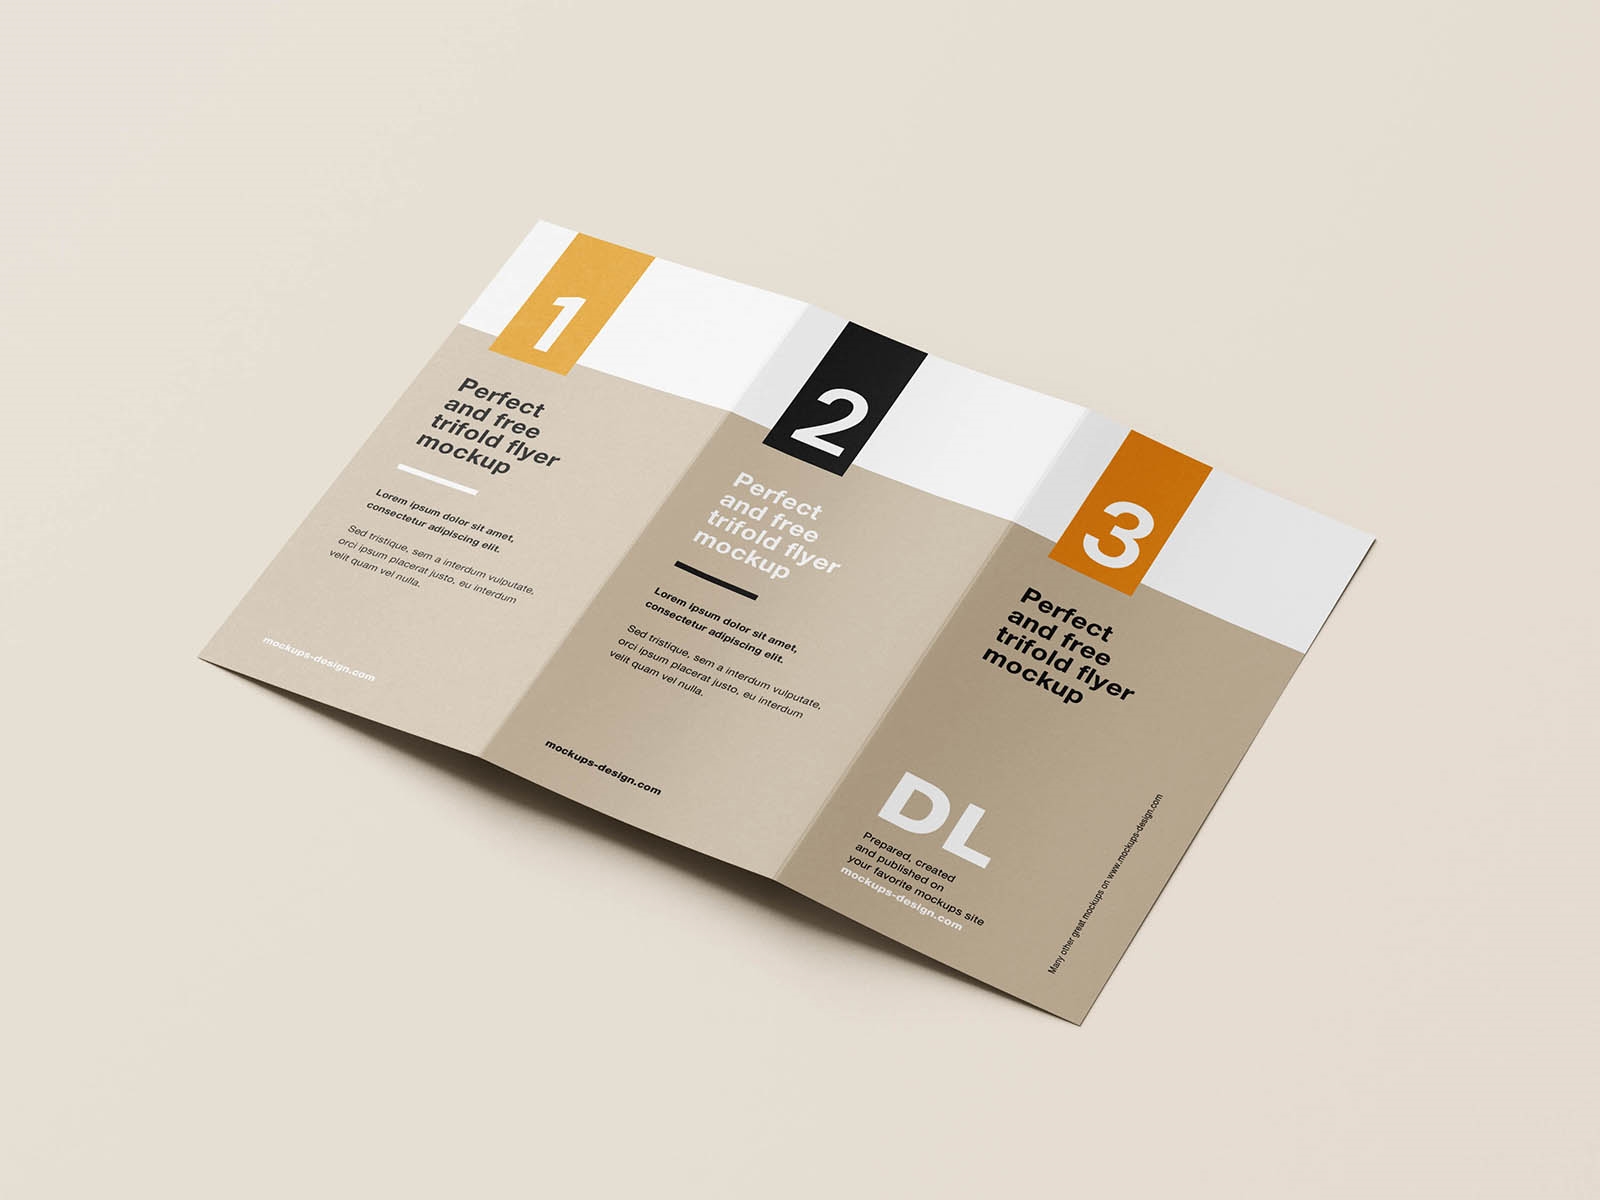 Perspective View of 7 Tri-Fold DL Flyer Mockups FREE PSD